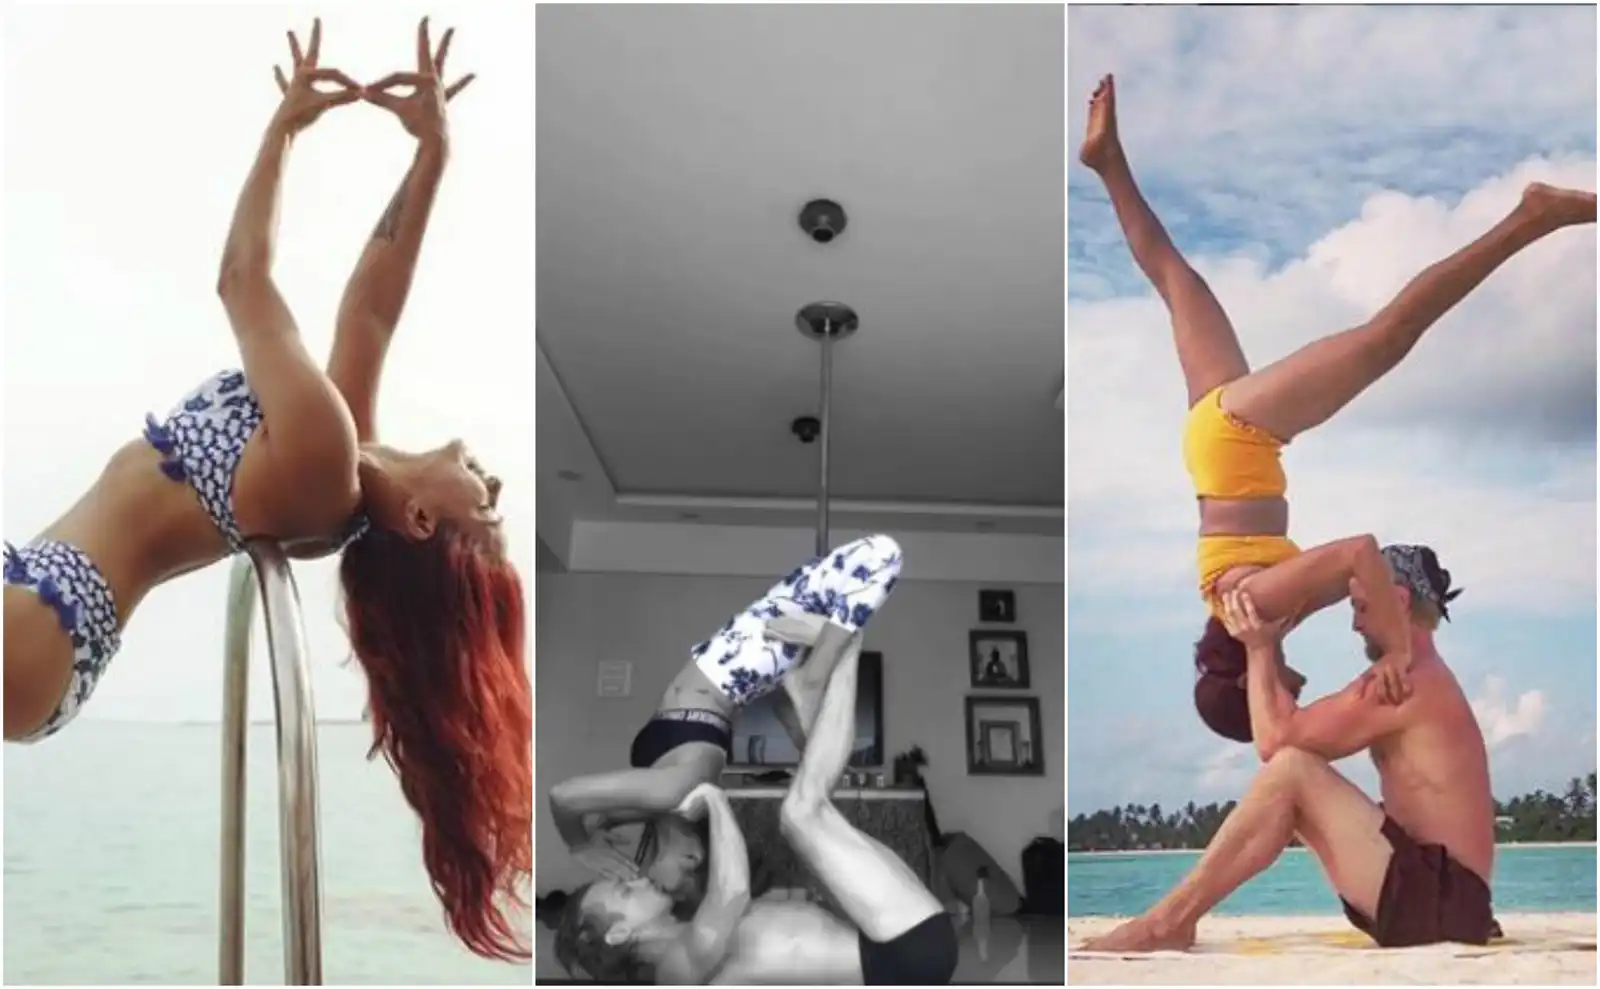 Aashka Goradia Or Her Yoga Skills, We Don't Know What Is More Amazing In These Pictures